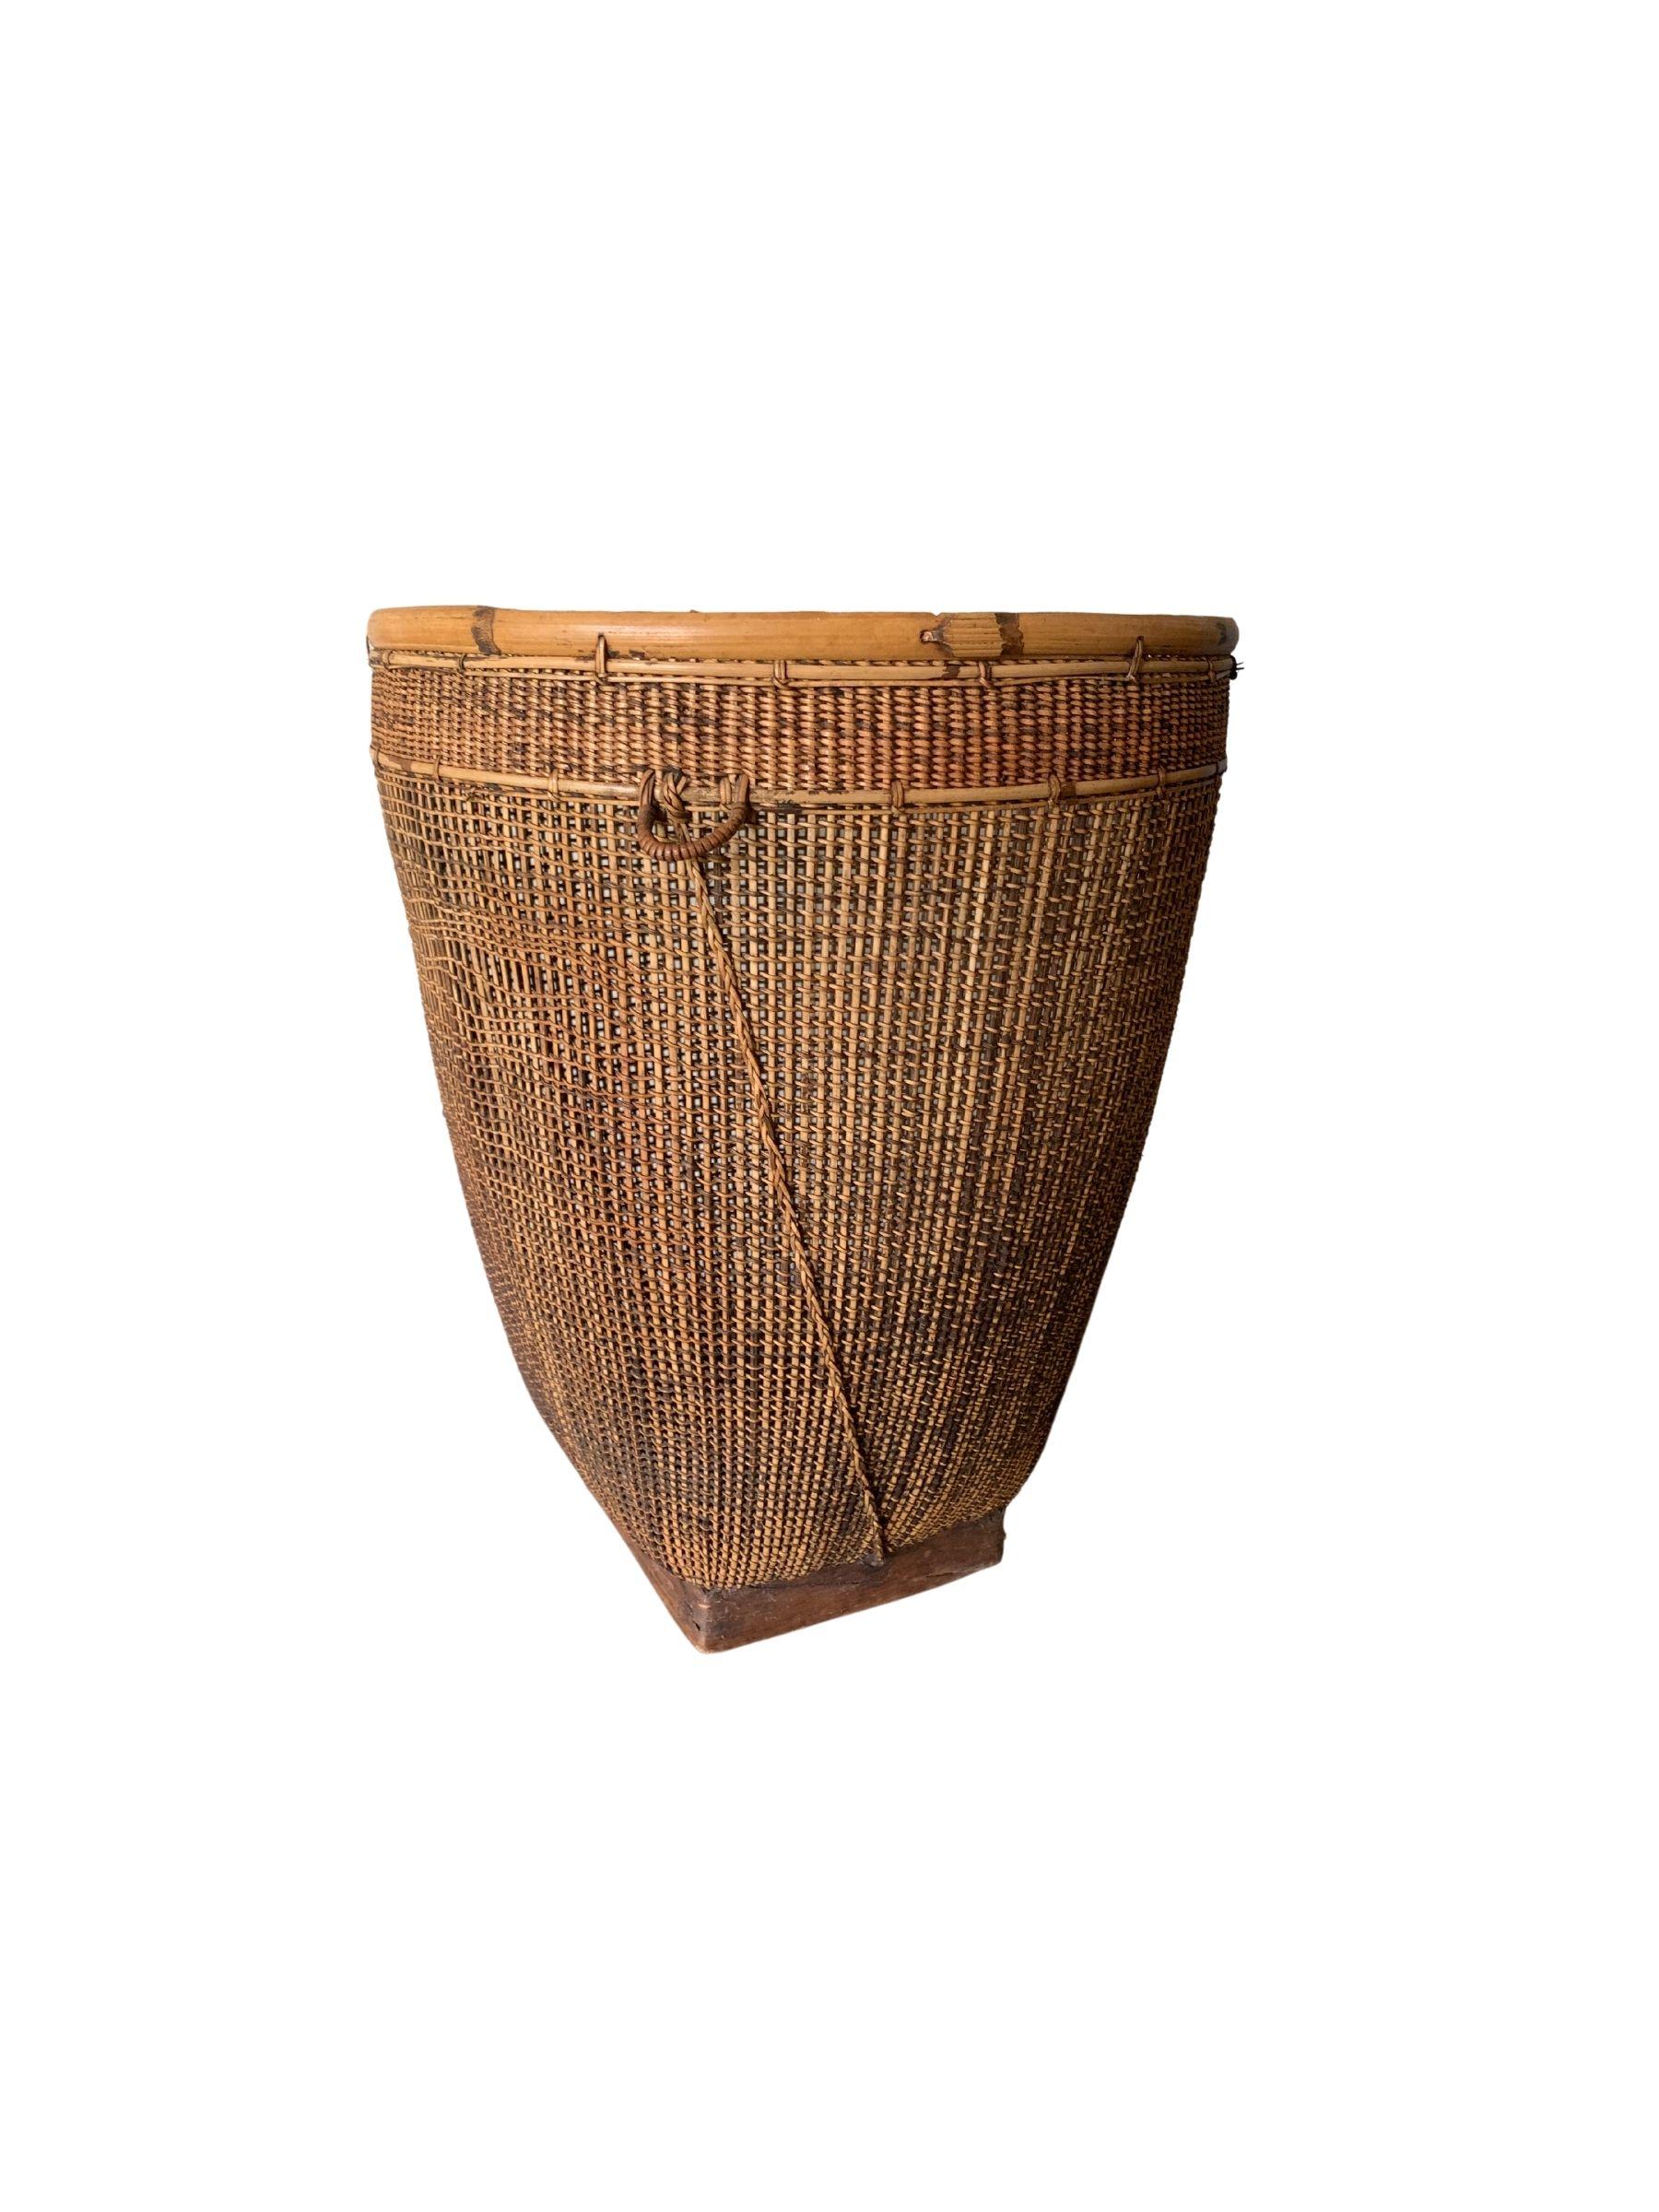 Indonesian Bamboo & Rattan Basket from Dayak Tribe, Hand-Crafted Borneo, Indonesia, c. 1950 For Sale